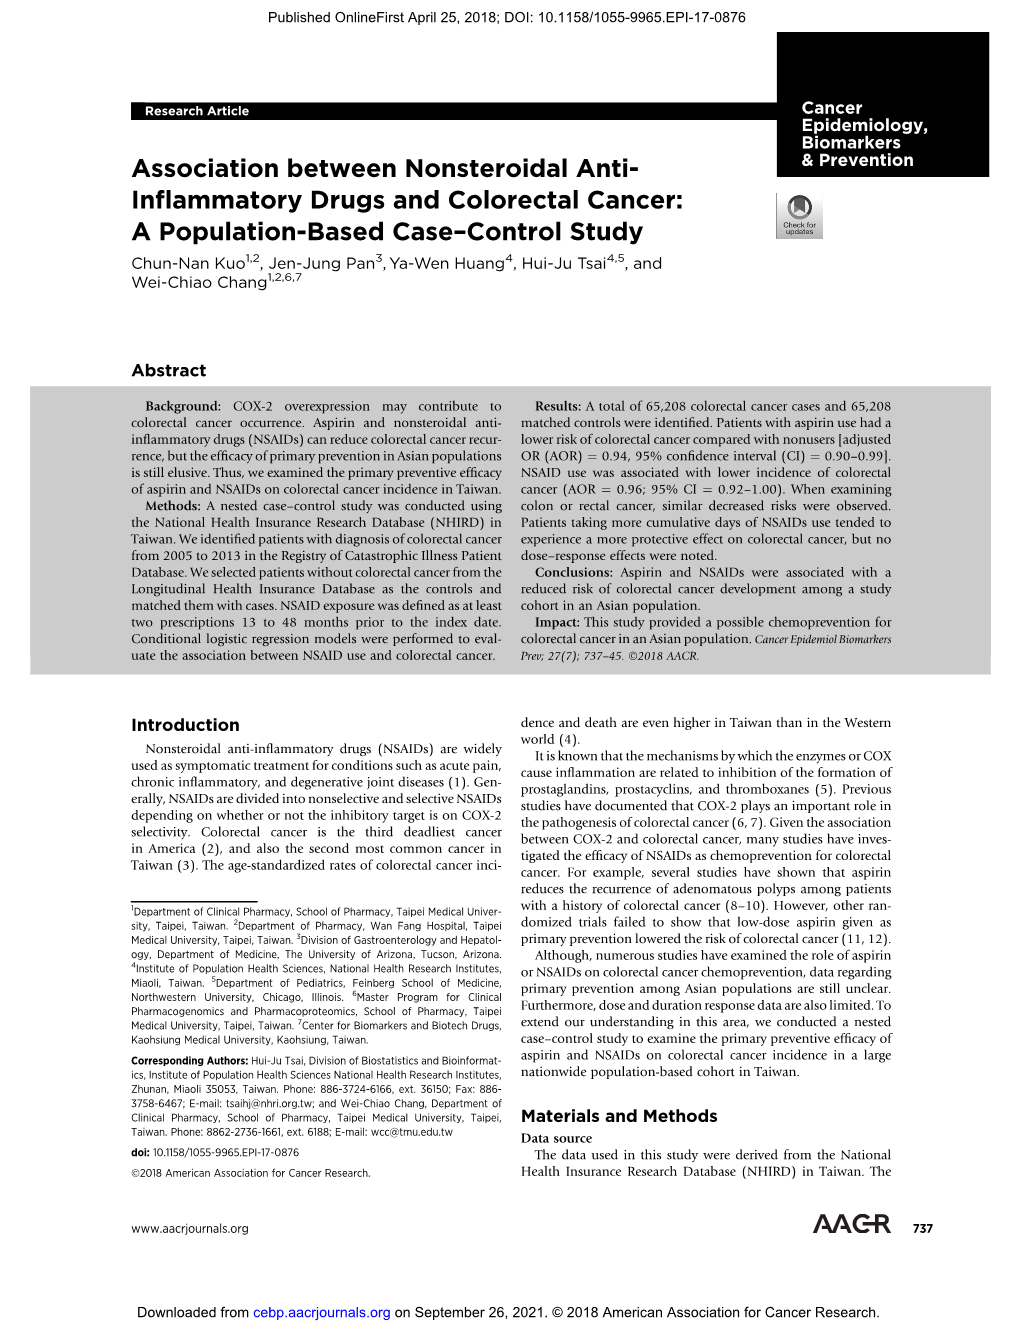 Inflammatory Drugs and Colorectal Cancer: a Population-Based Case−Control Study